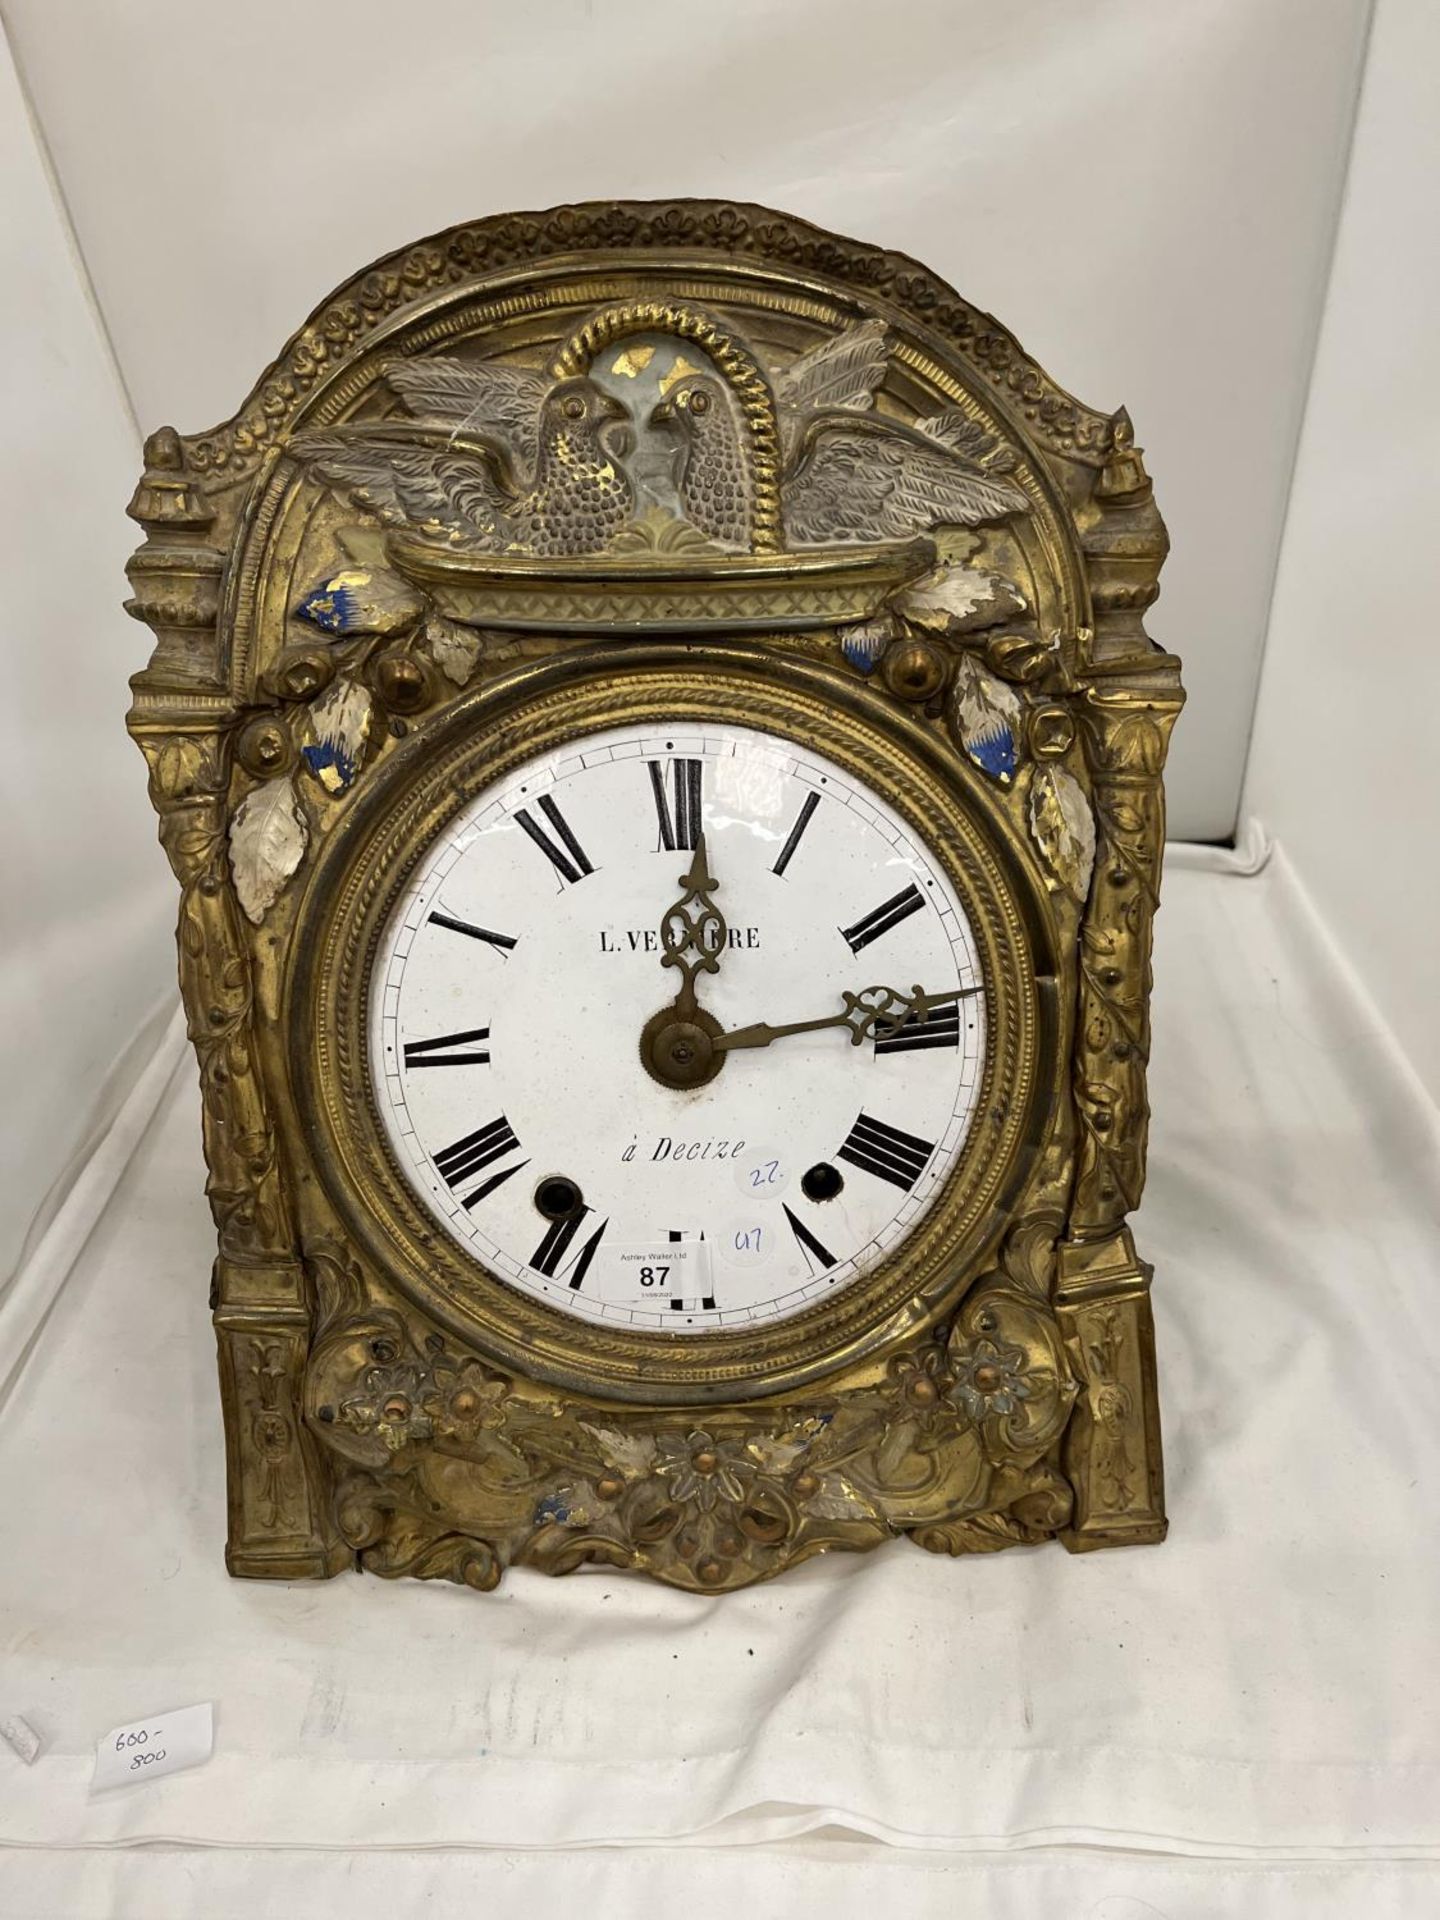 A FRENCH WALL CLOCK WITH A CERAMIC DIAL IN NEED OF RESTORATION - Image 2 of 3